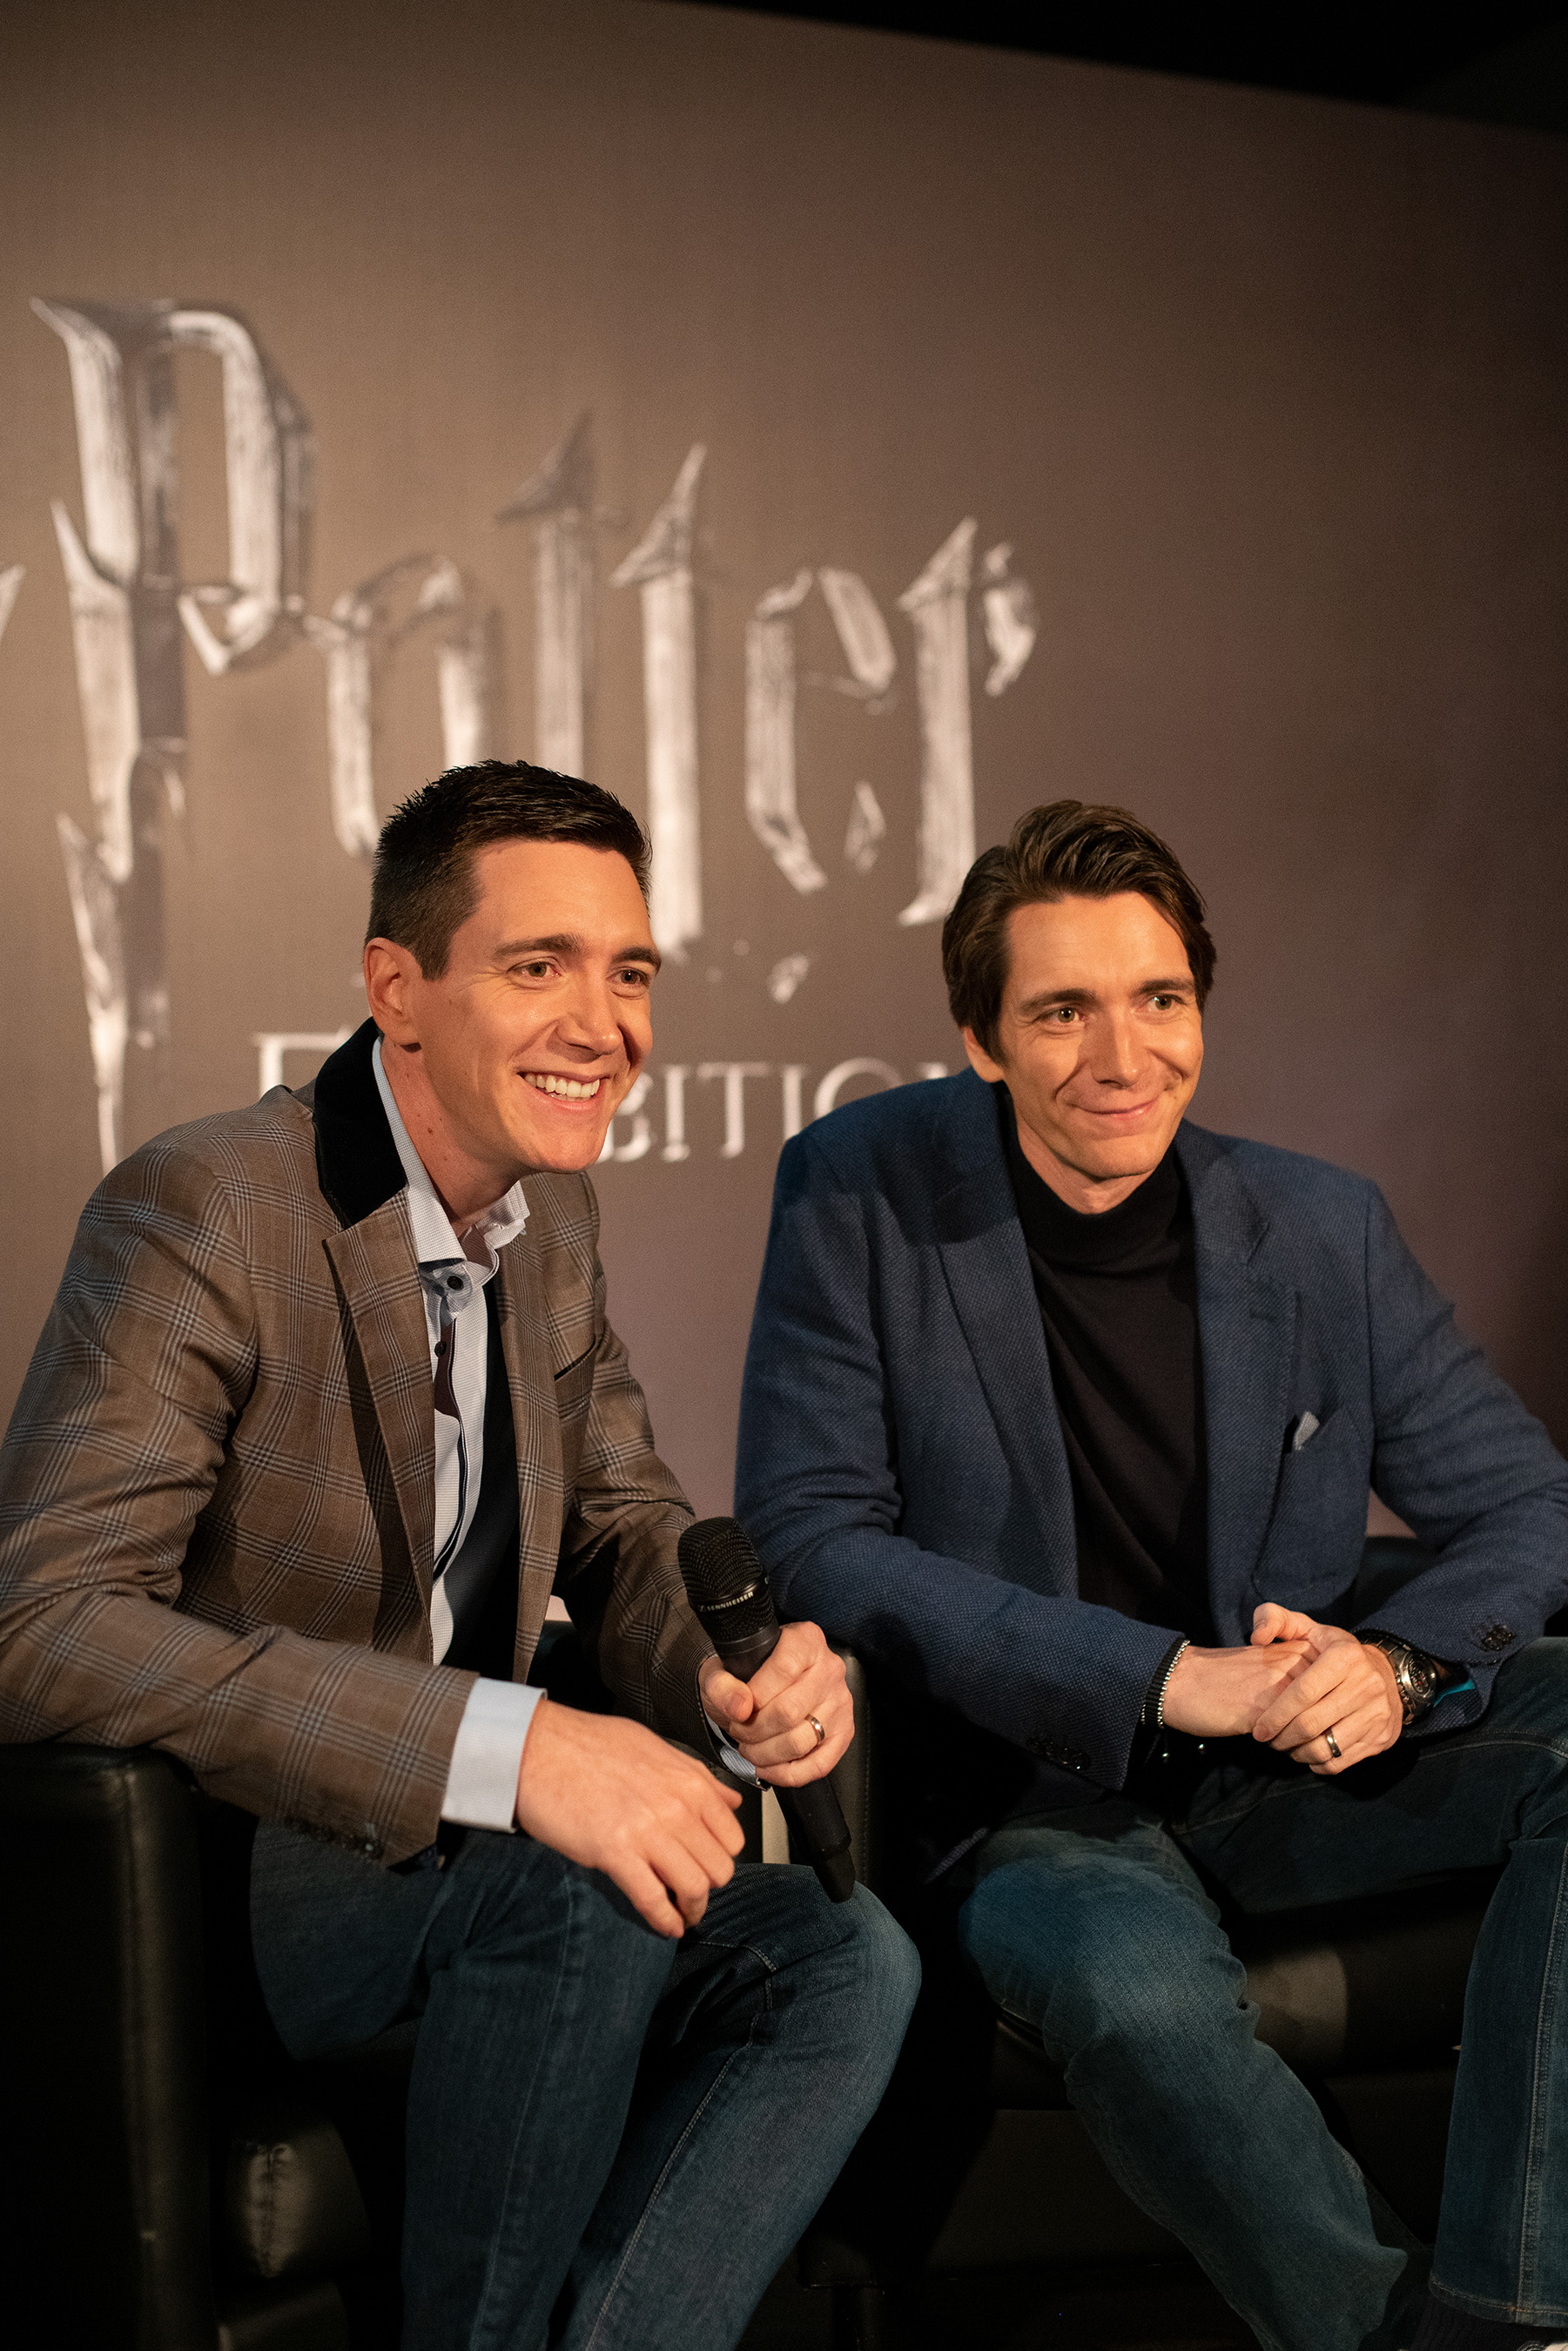 Film actors Oliver Phelps and James Phelps at Harry Pottertm: The Exhibition at the Pavilion of Portugal in Lisbon, Portugal